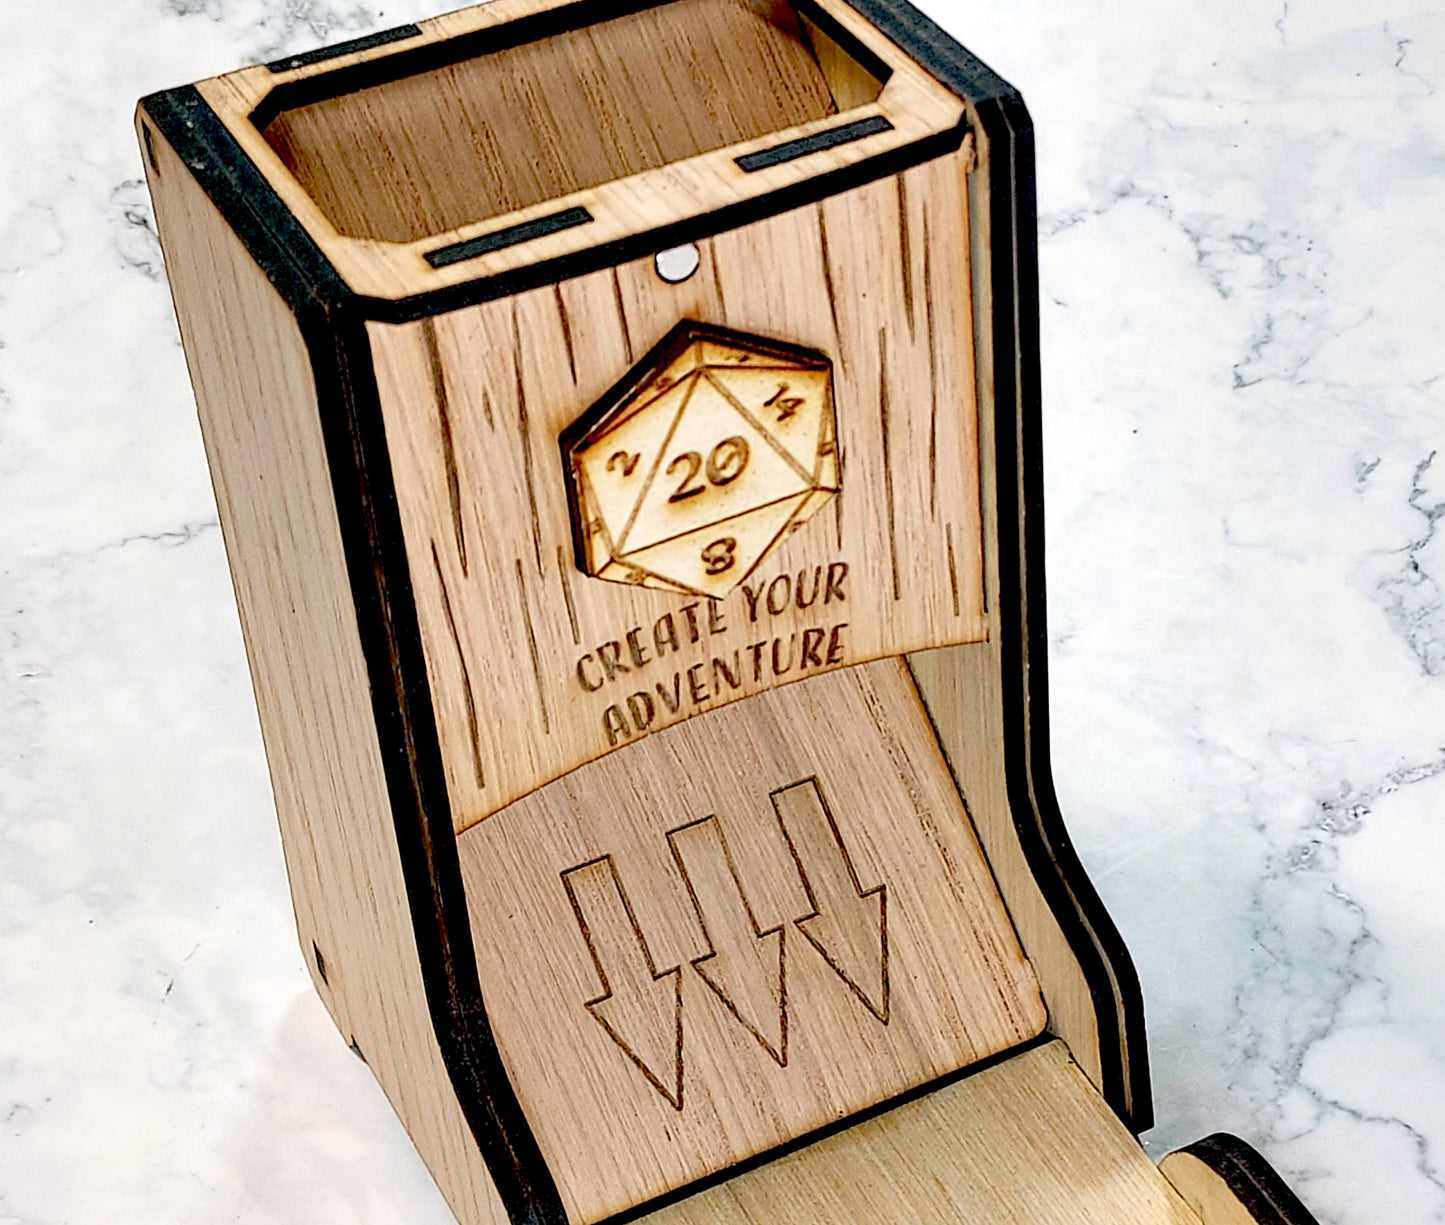 Dice Tower - D20 - wooden rpg dice roller dice tower for D&D, pathfinder and other tabletop dice games